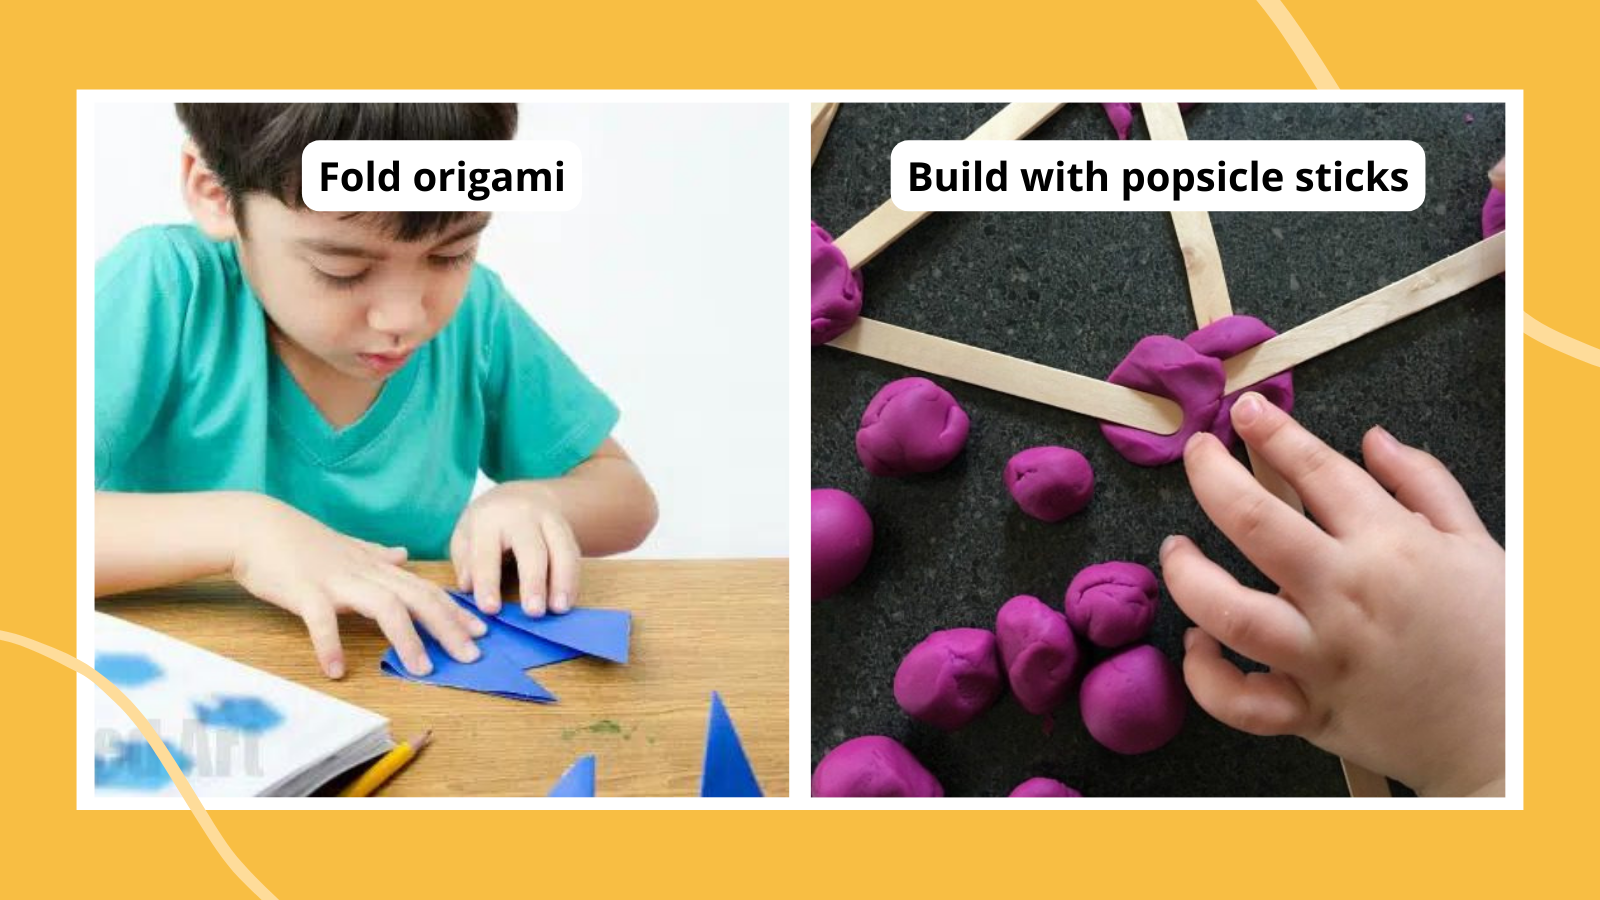 Examples of indoor recess games and ideas such as folding origami and STEM challenges with play dough and popsicle sticks.